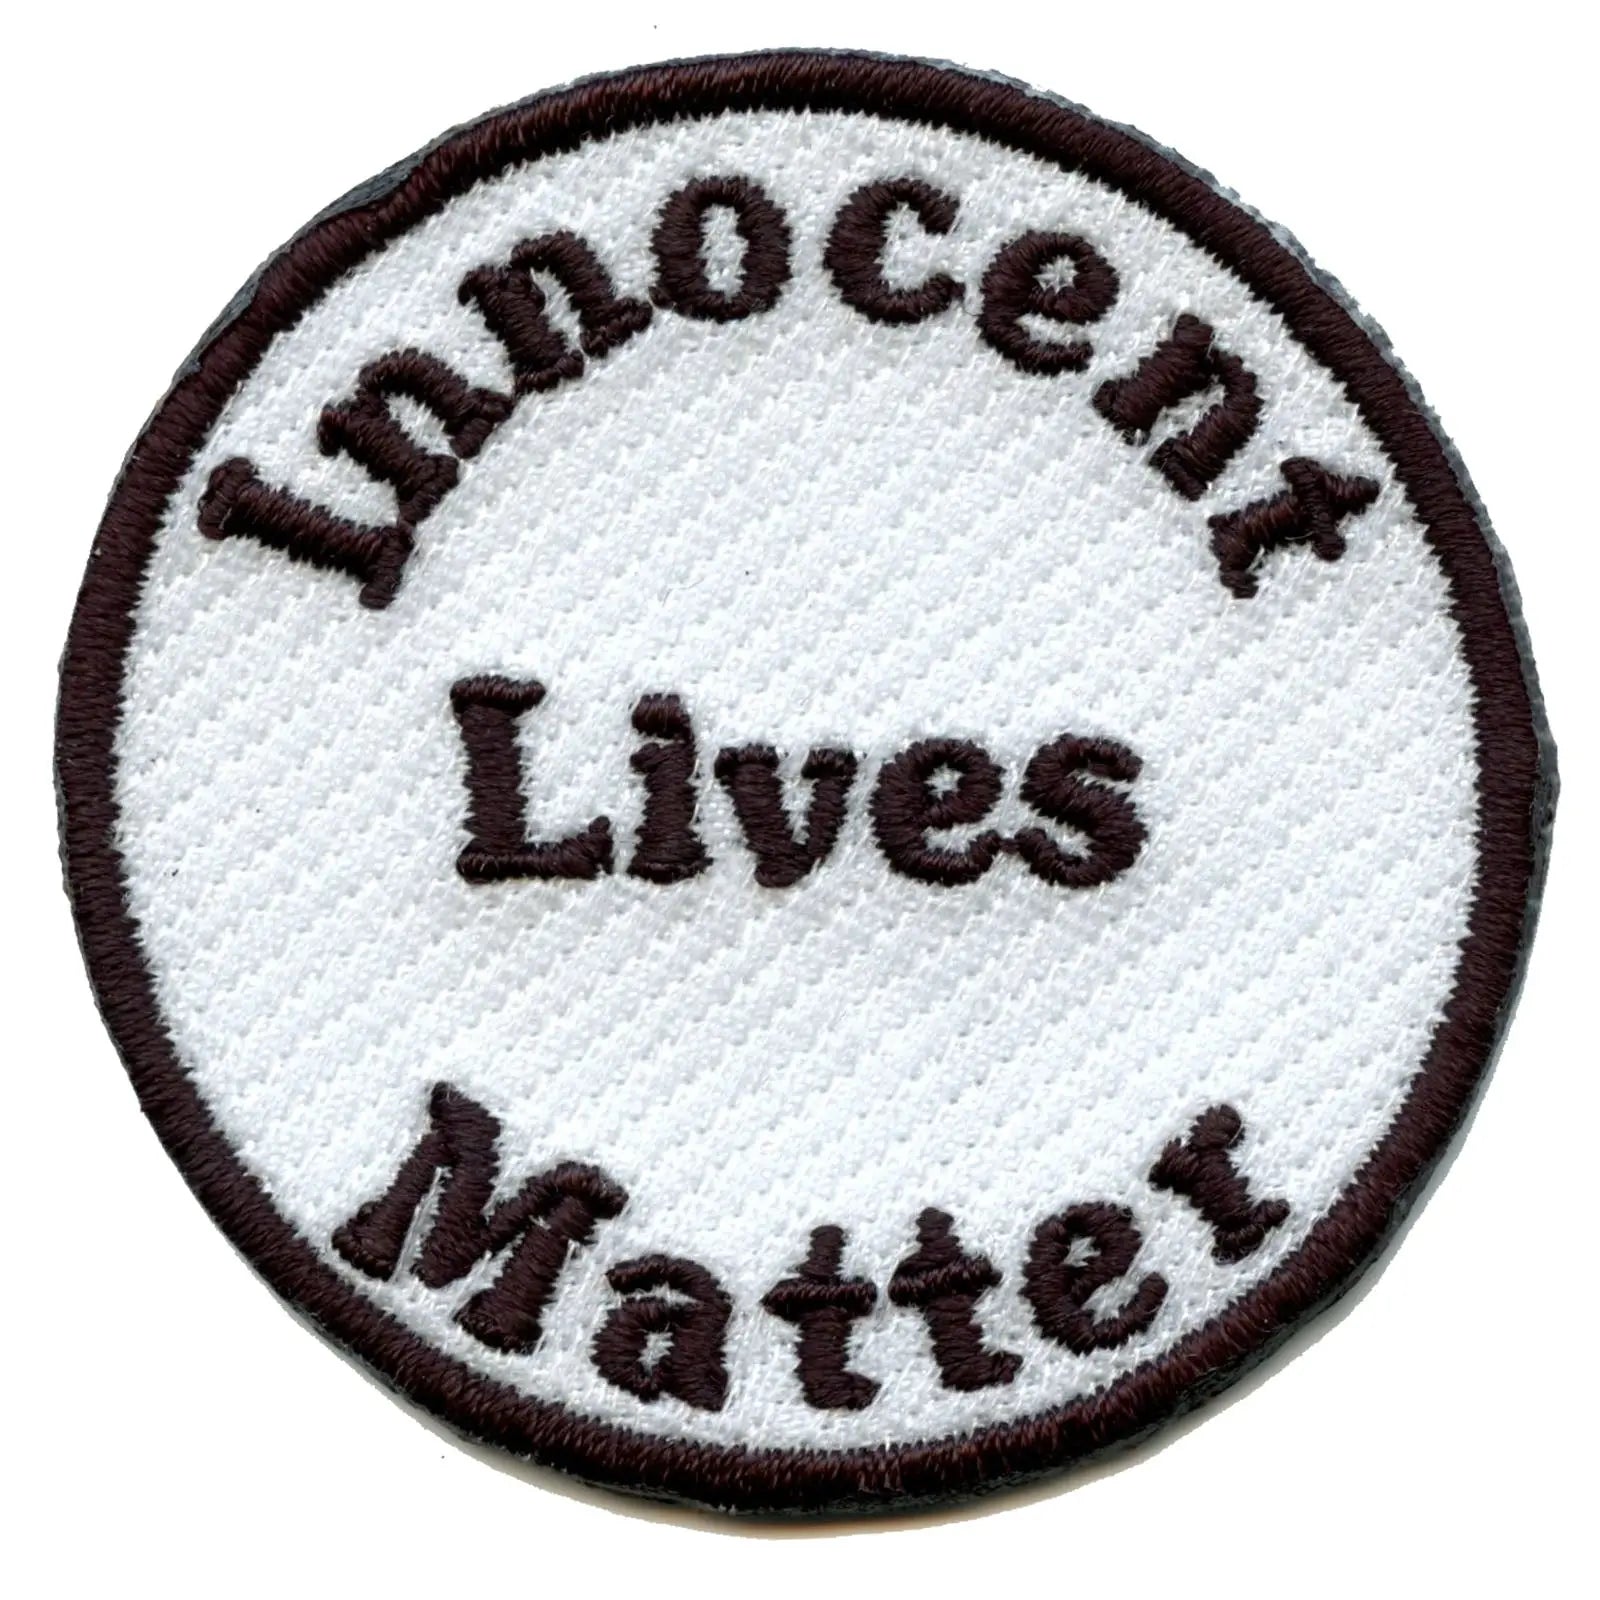 Innocent Lives Matter Round Embroidered Iron On Patch 